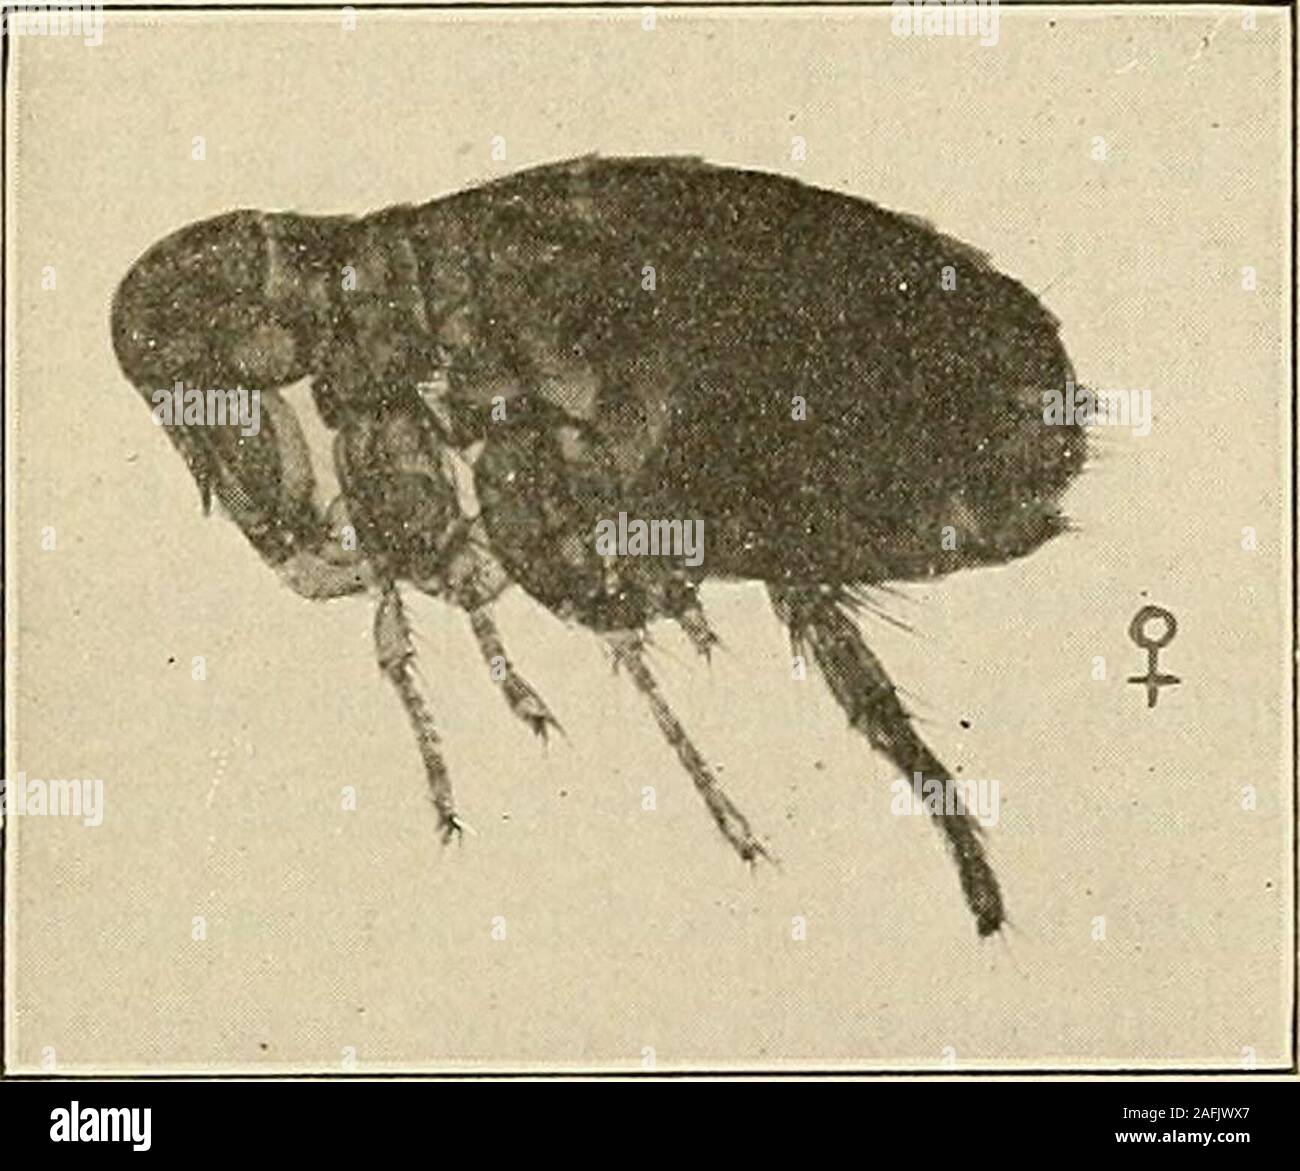 . Preventive medicine and hygiene. FiG. 43.—A Squirrel Flea (Hoplopsyllus anomalus Baker.). tance of these discoveries, it is only necessary to call to mind that, inorder to eradicate plague forever from the surface of the globe, a war-fare against the rat alone is not sufficient, but must include the rodentsmentioned and perhaps others. Simond in 1897 advanced the theory that plague was carried byfleas. This theory was developed by J. Ashburton Thompson and othersand conclusively proved by the Indian Plague Commission. The exactmethod by which the flea transmits the infection from animal to a Stock Photo